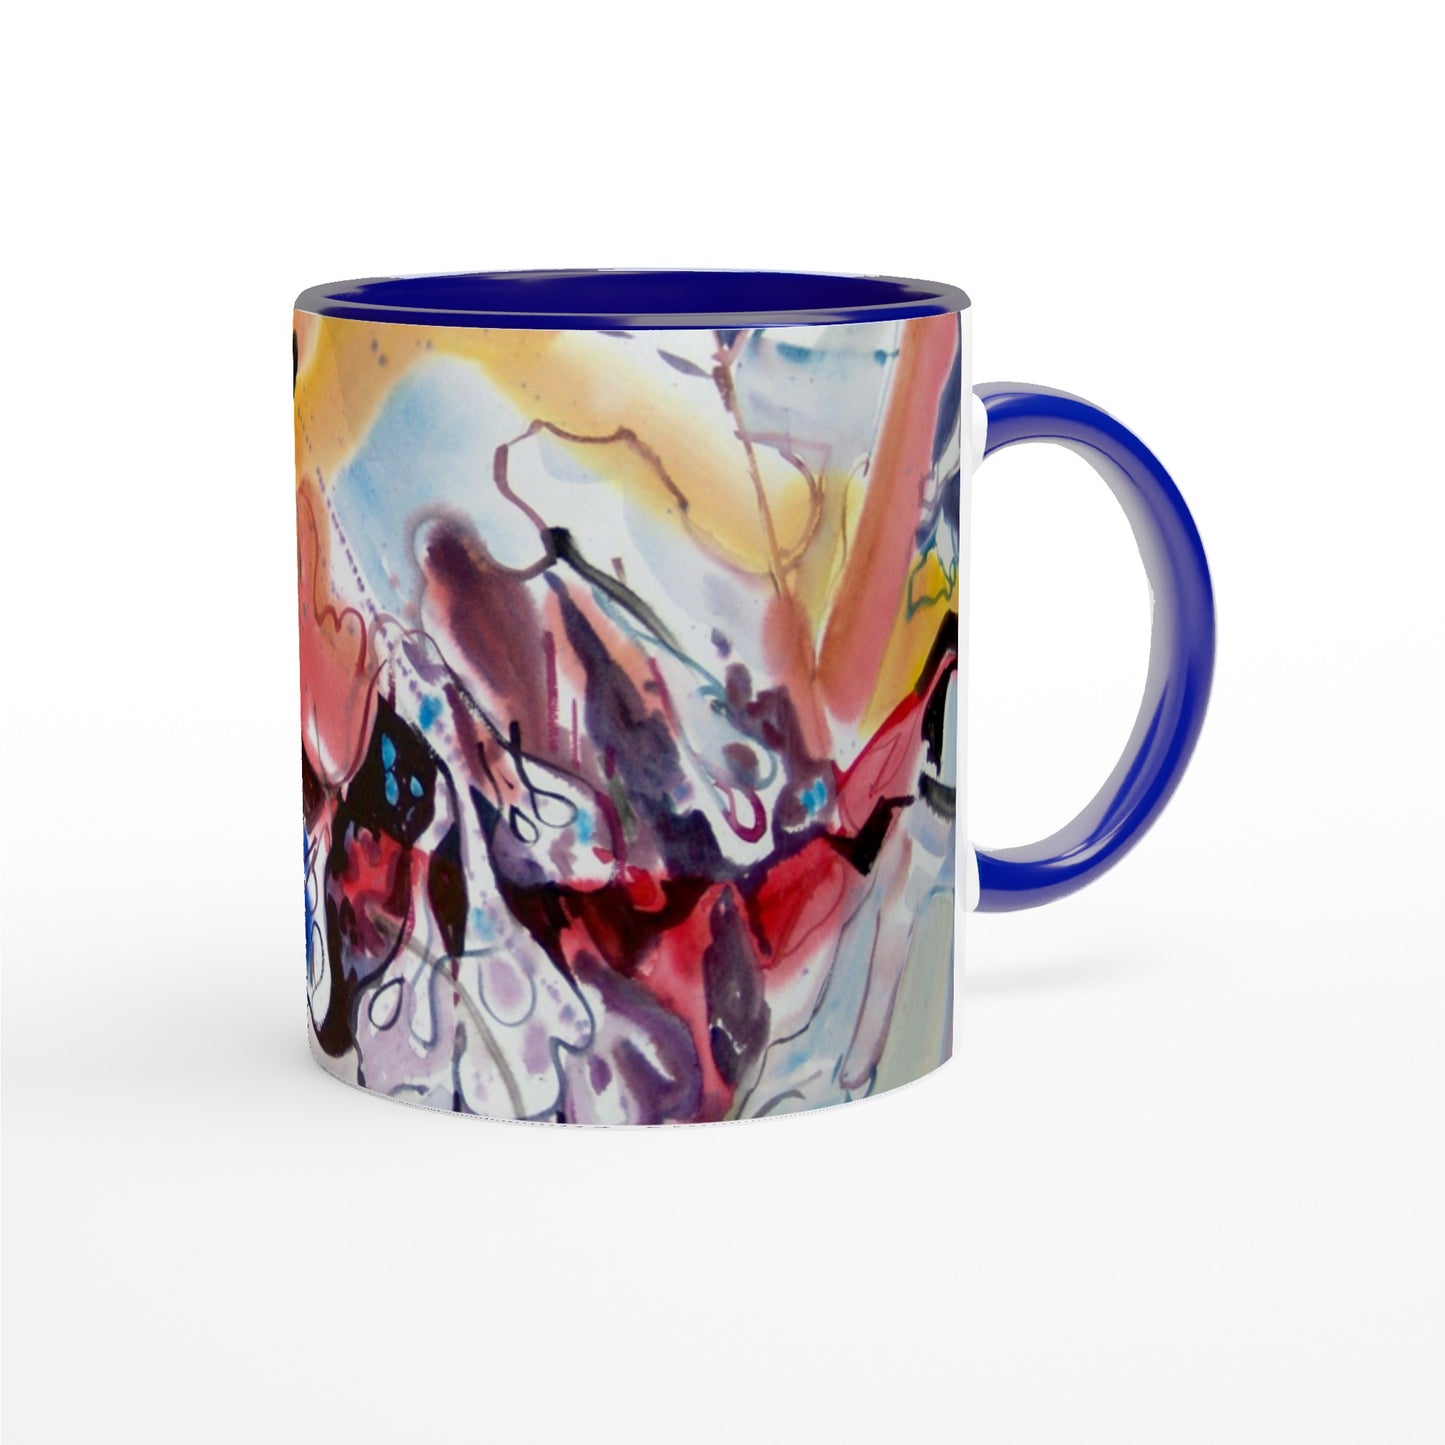 "Floral Fantasy" Abstract White 11oz Ceramic Mug with Color Inside by Barbara Cleary Designs